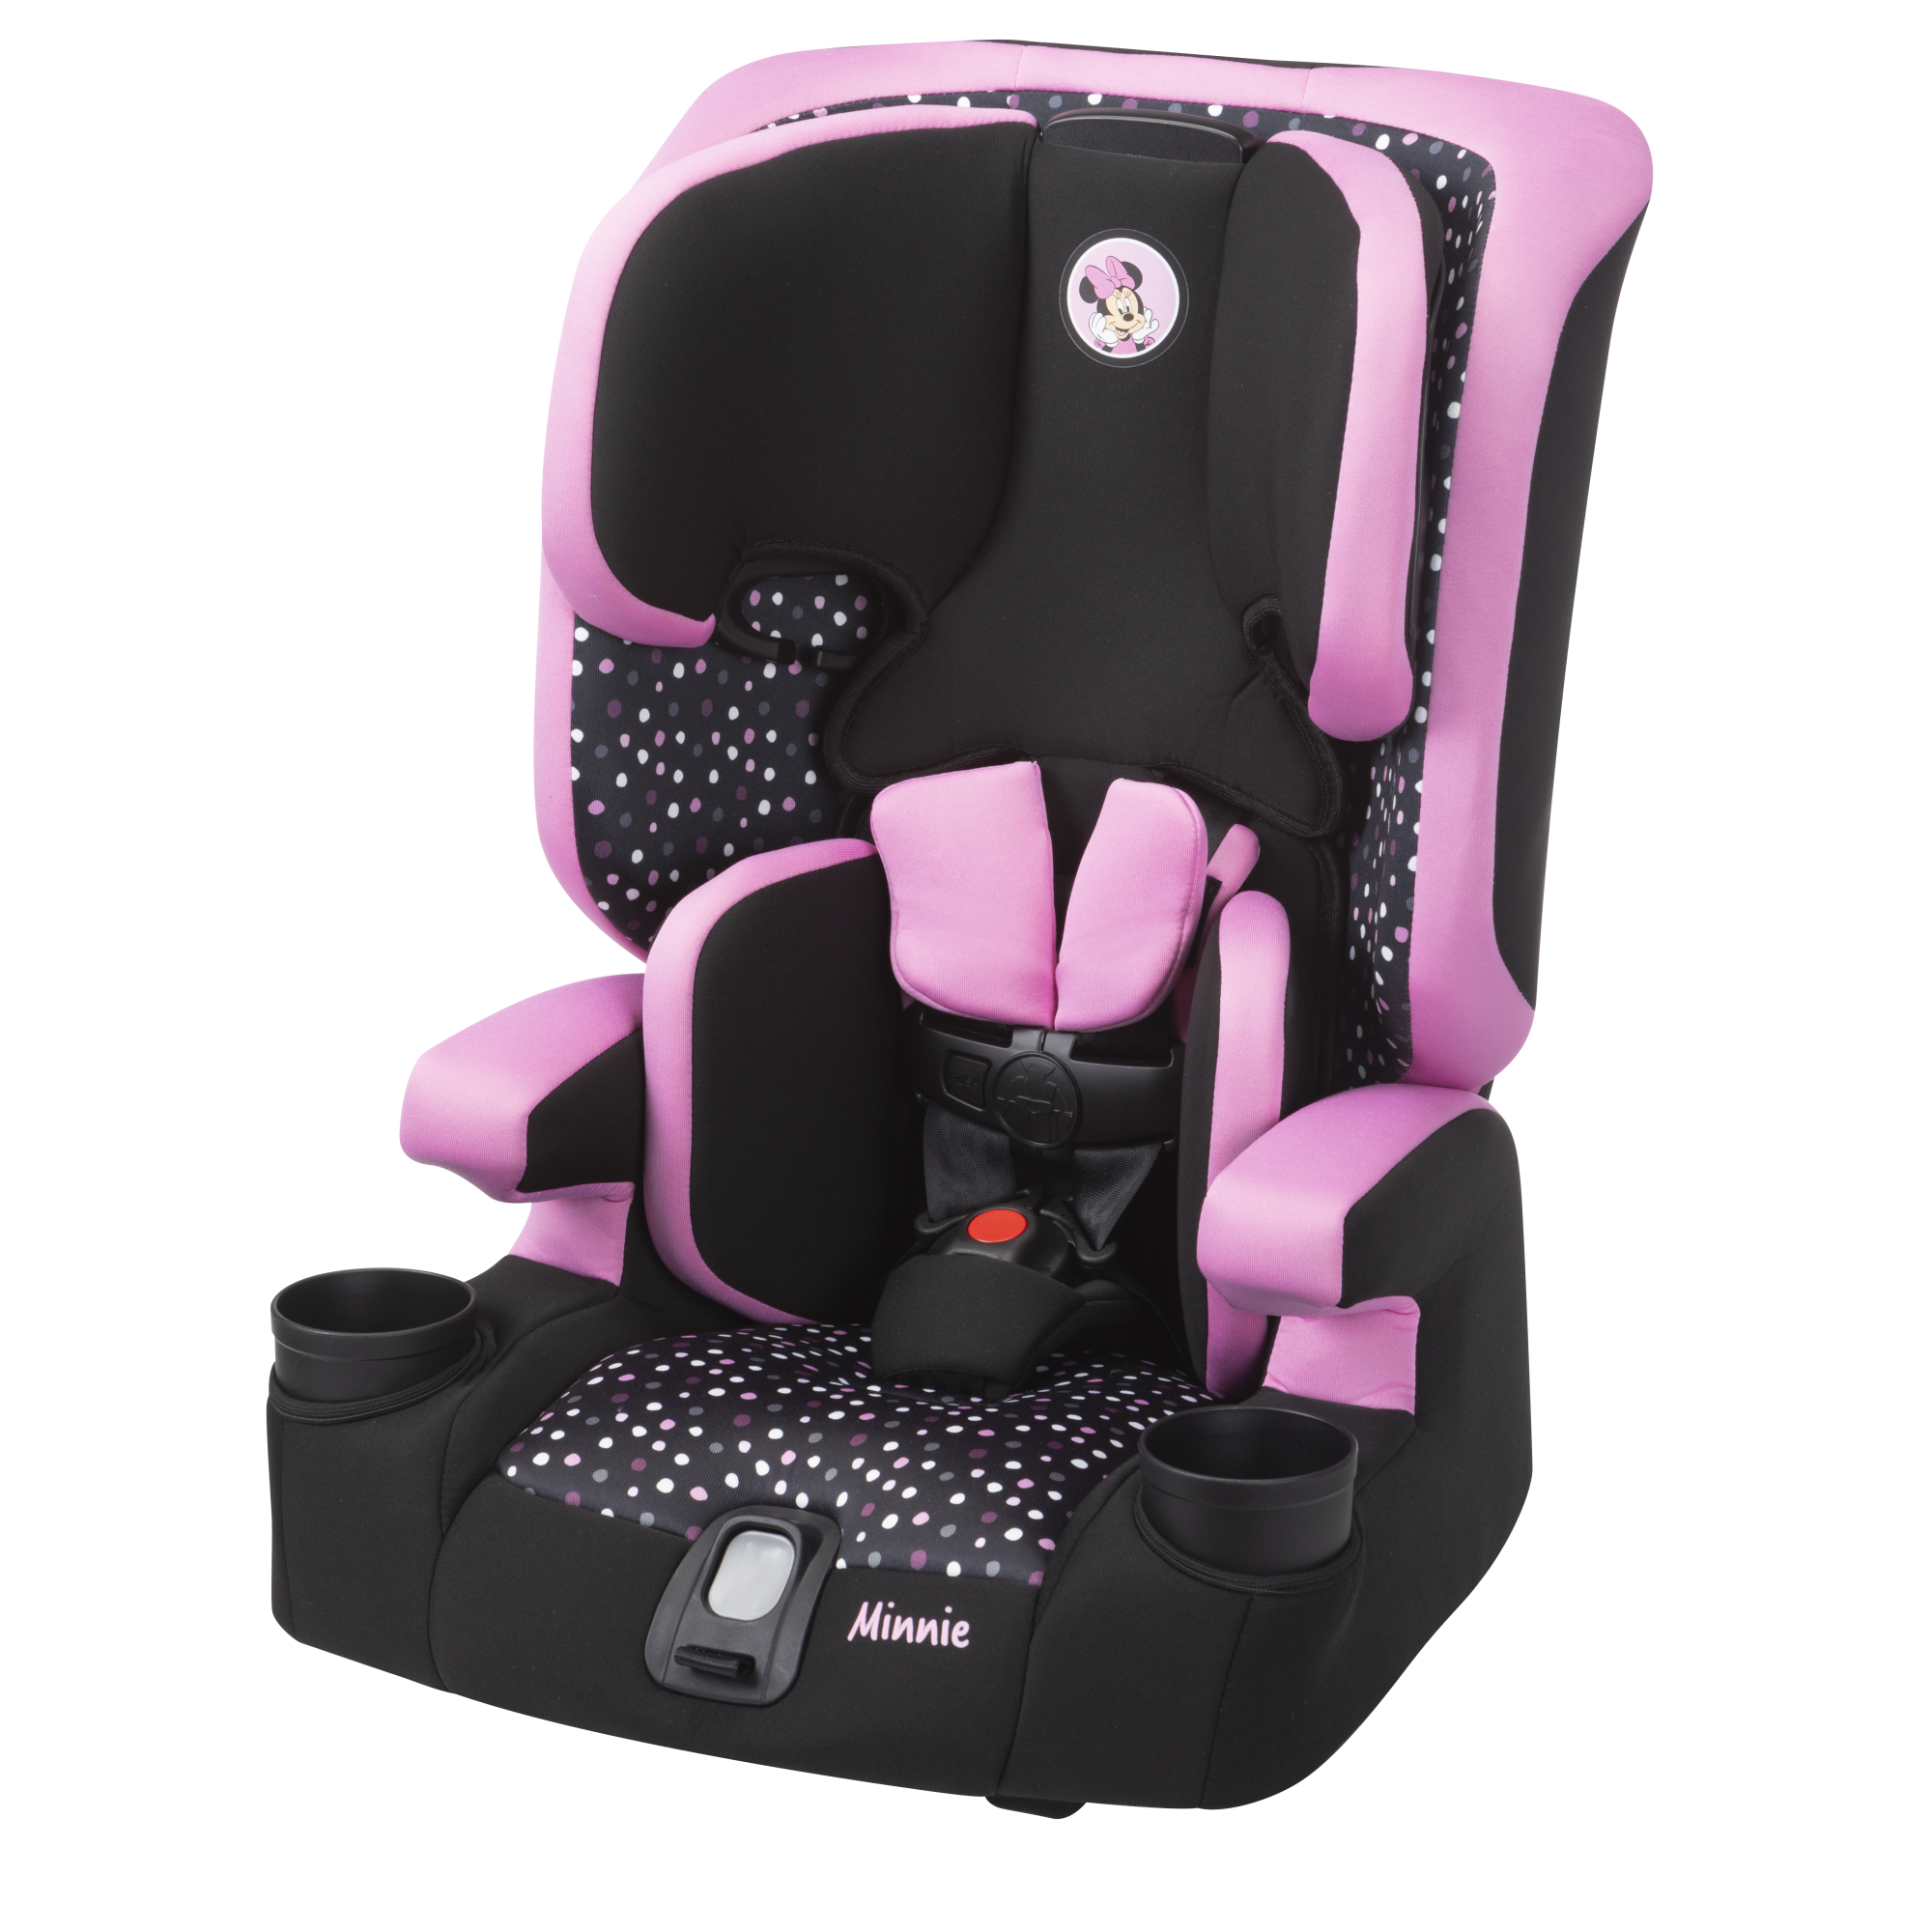 Disney Baby MagicSquad 3-in-1 Harness Booster Car Seat - Minnie Dot Party - 45 degree angle view of left side